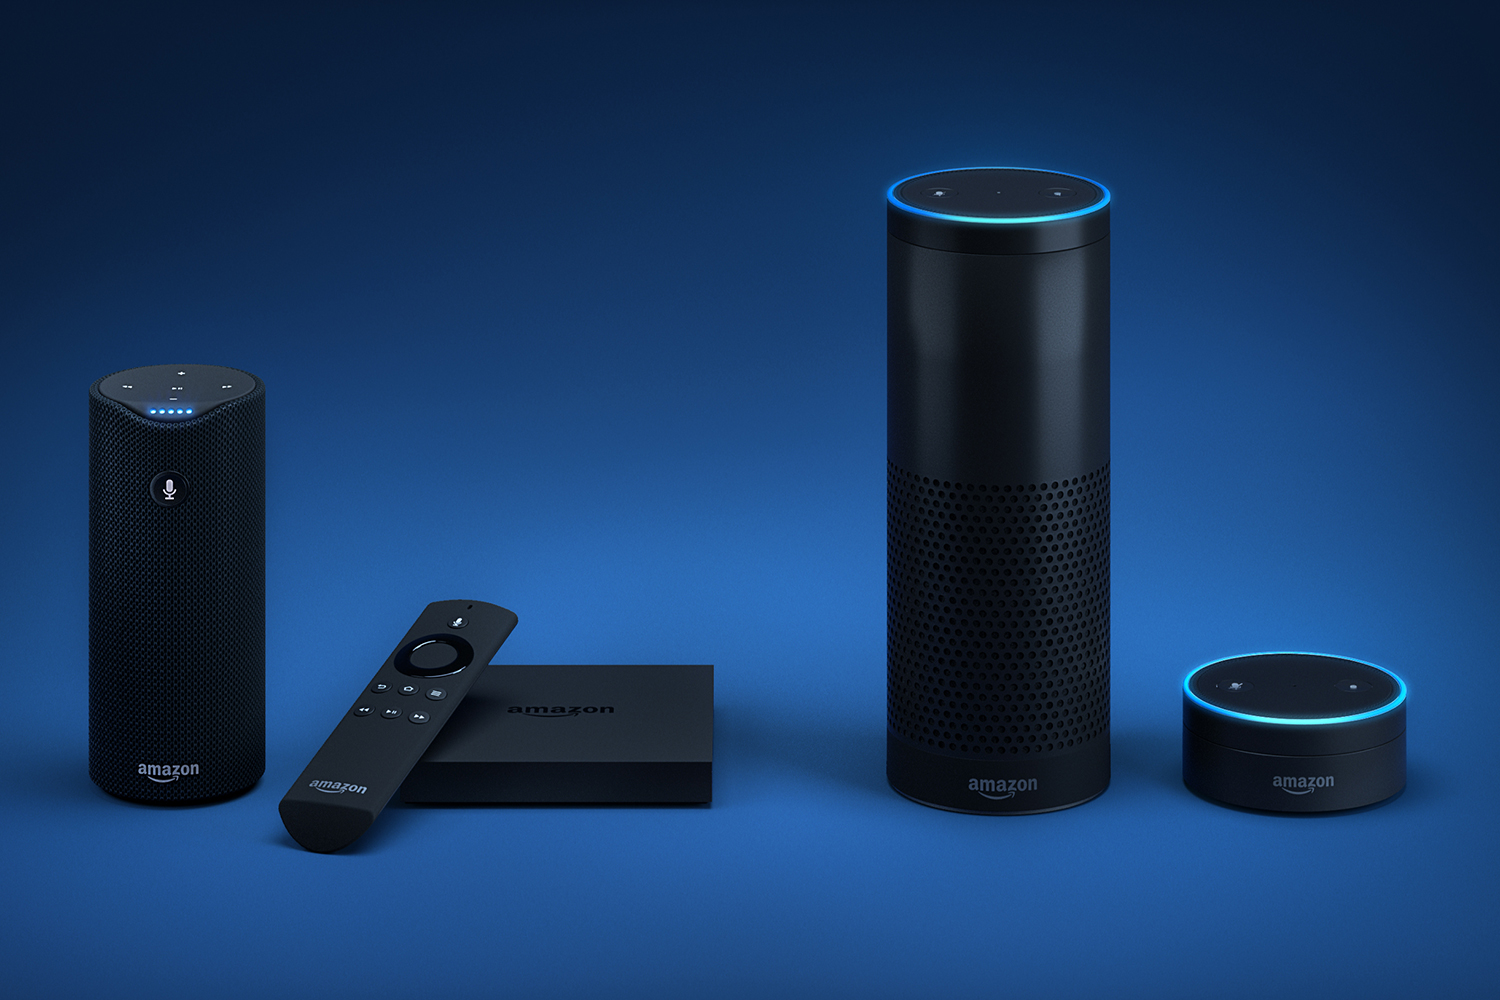 How To Buy Amazon Echo Devices In India